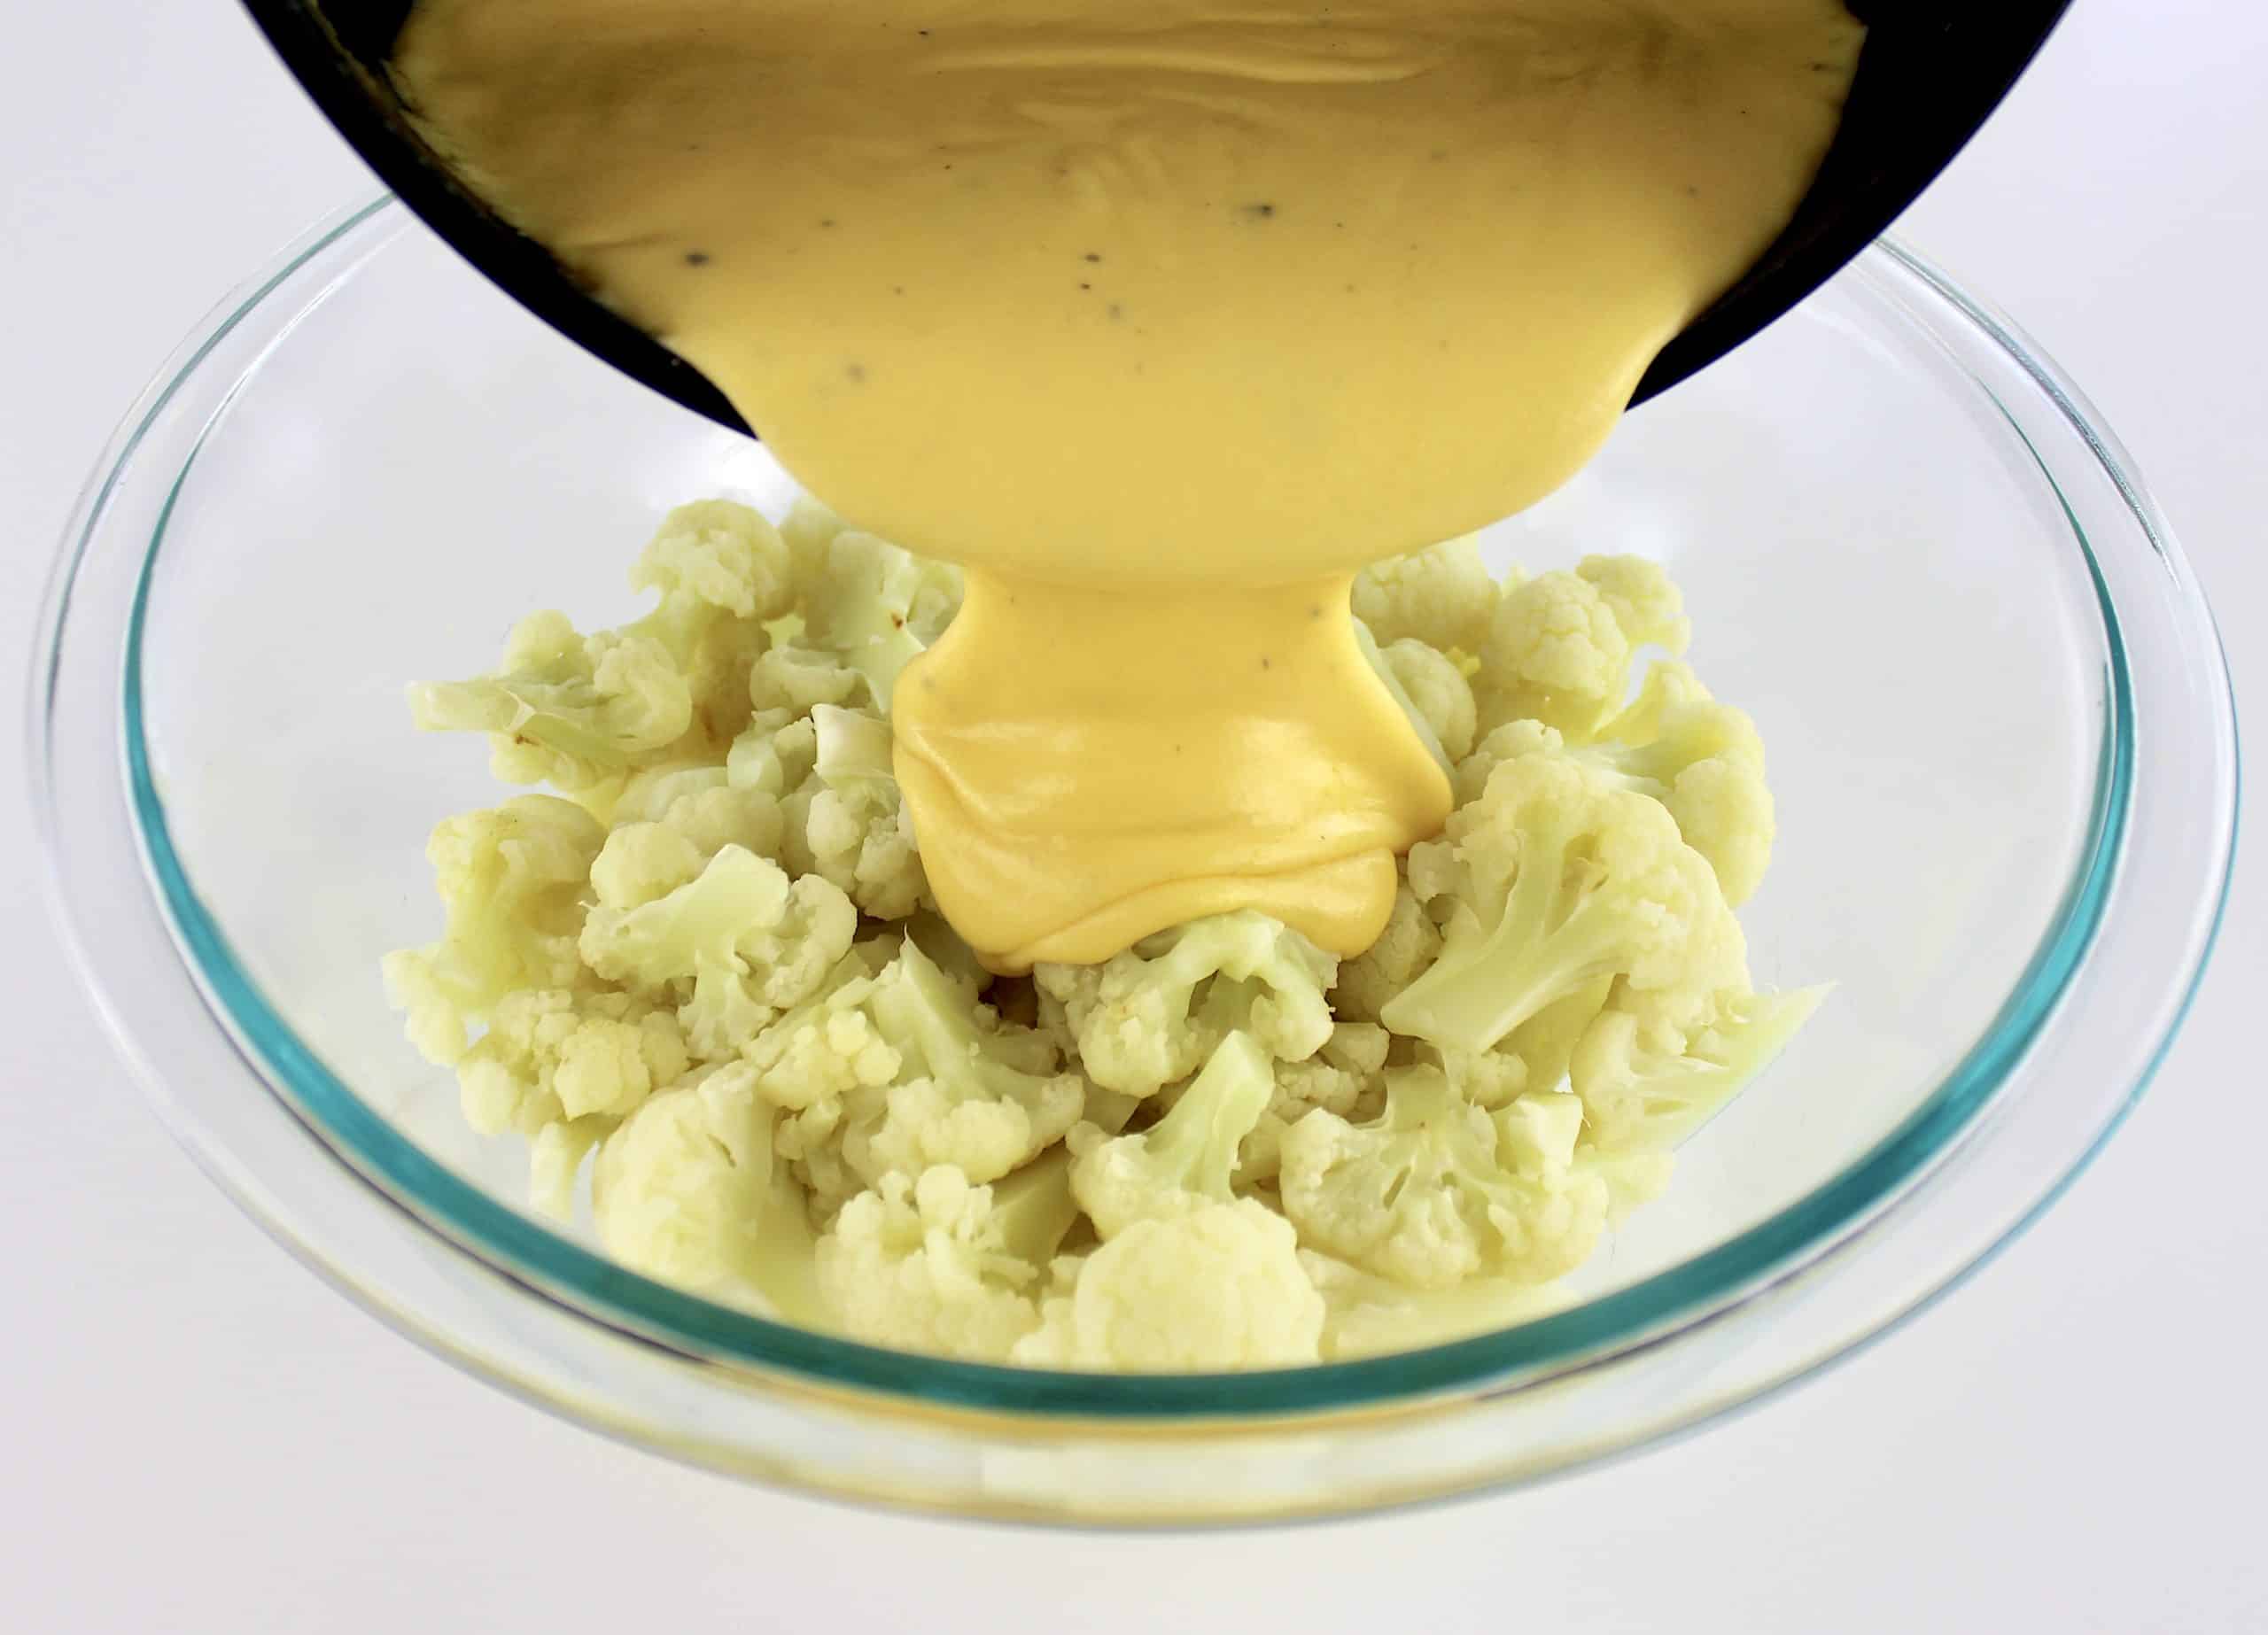 cheese sauce being poured over cooked cauliflower florets in glass bowl